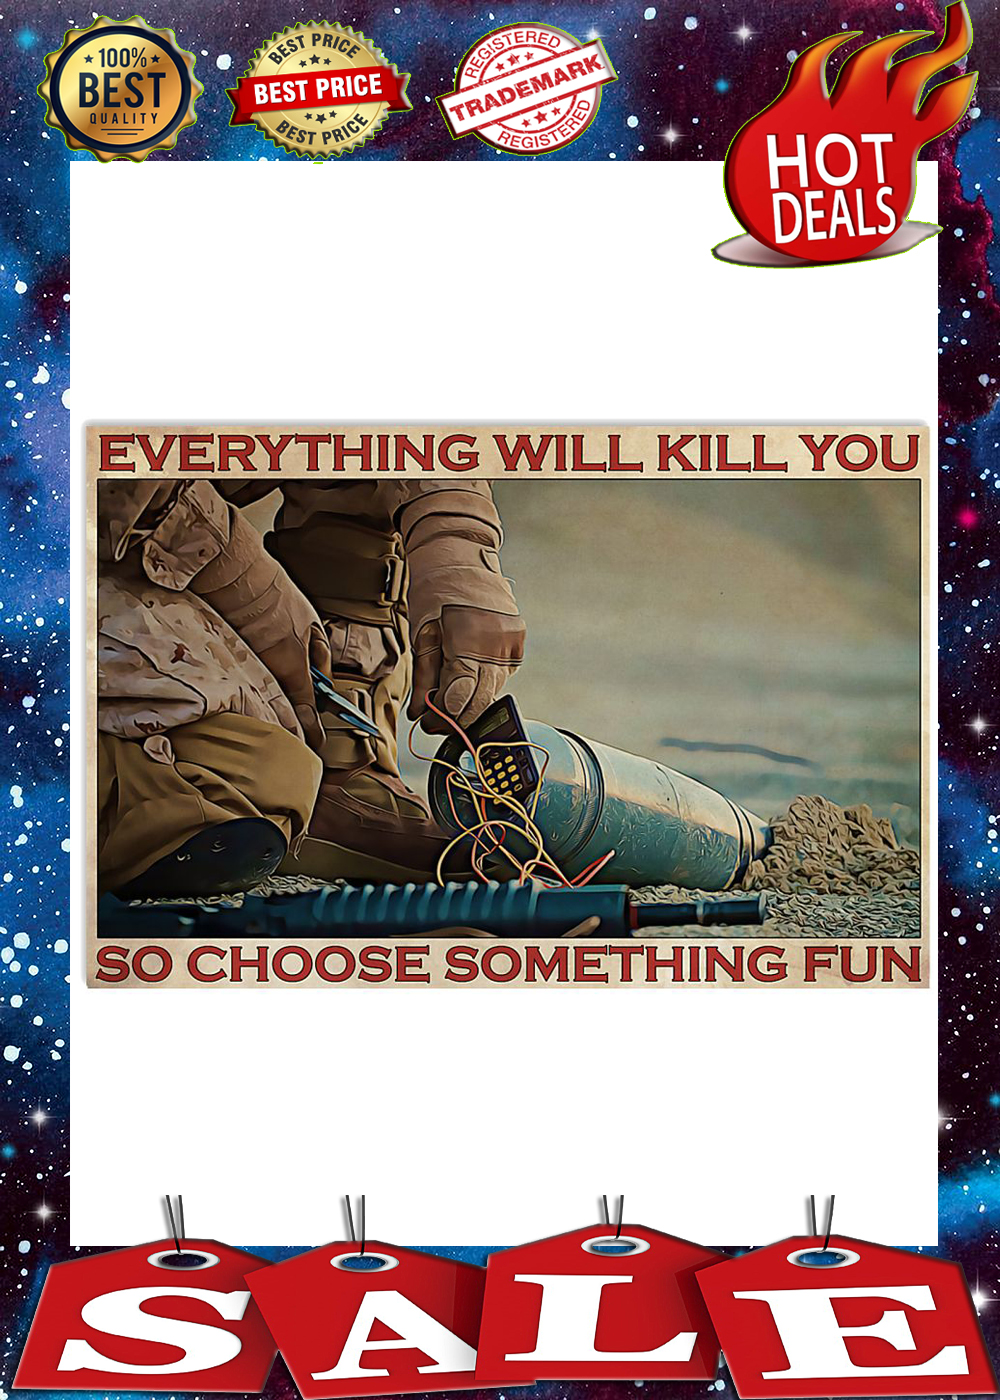 Bomb defusal everything will kill you so choose something fun poster